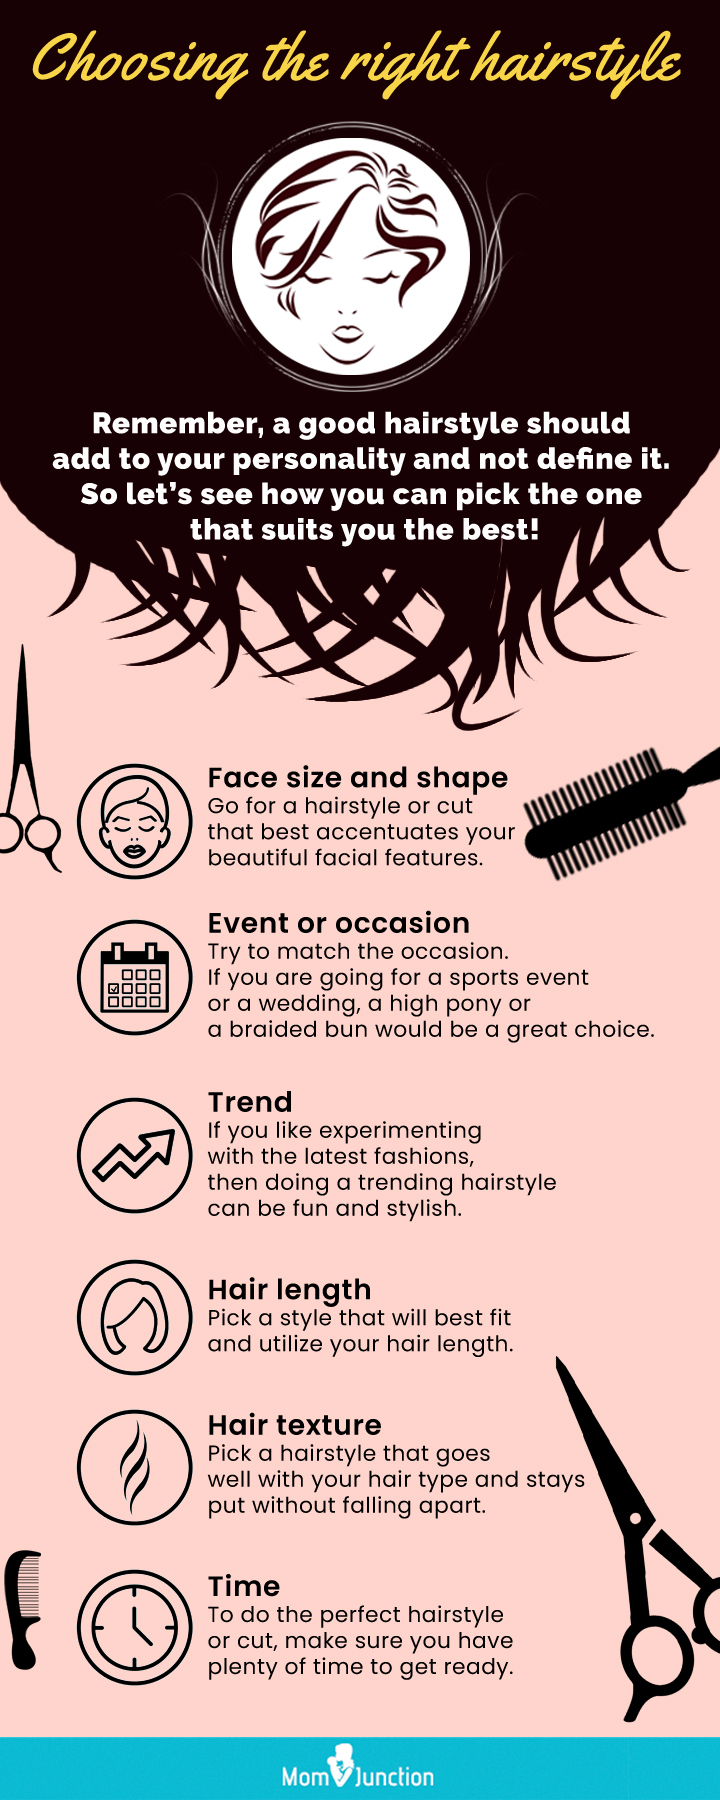 stylish haircuts and trendy hairstyles for teenage girls [infographic]